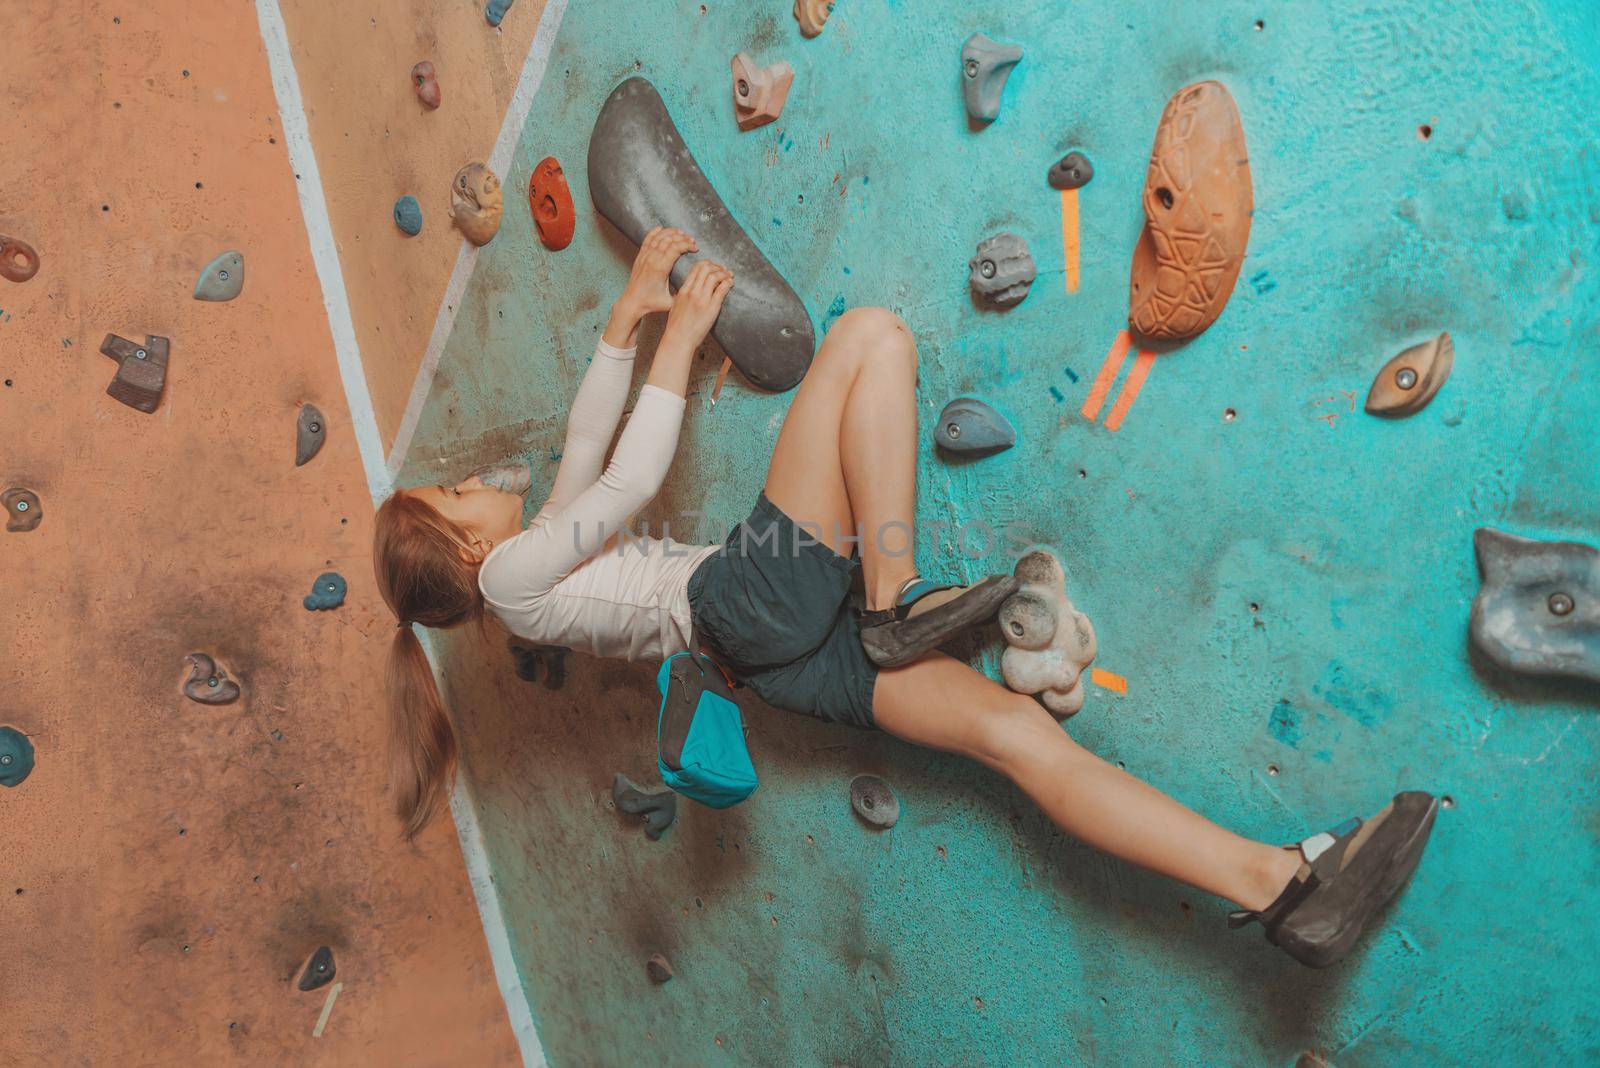 Climber little sporty girl exercises on artificial boulders wall indoor